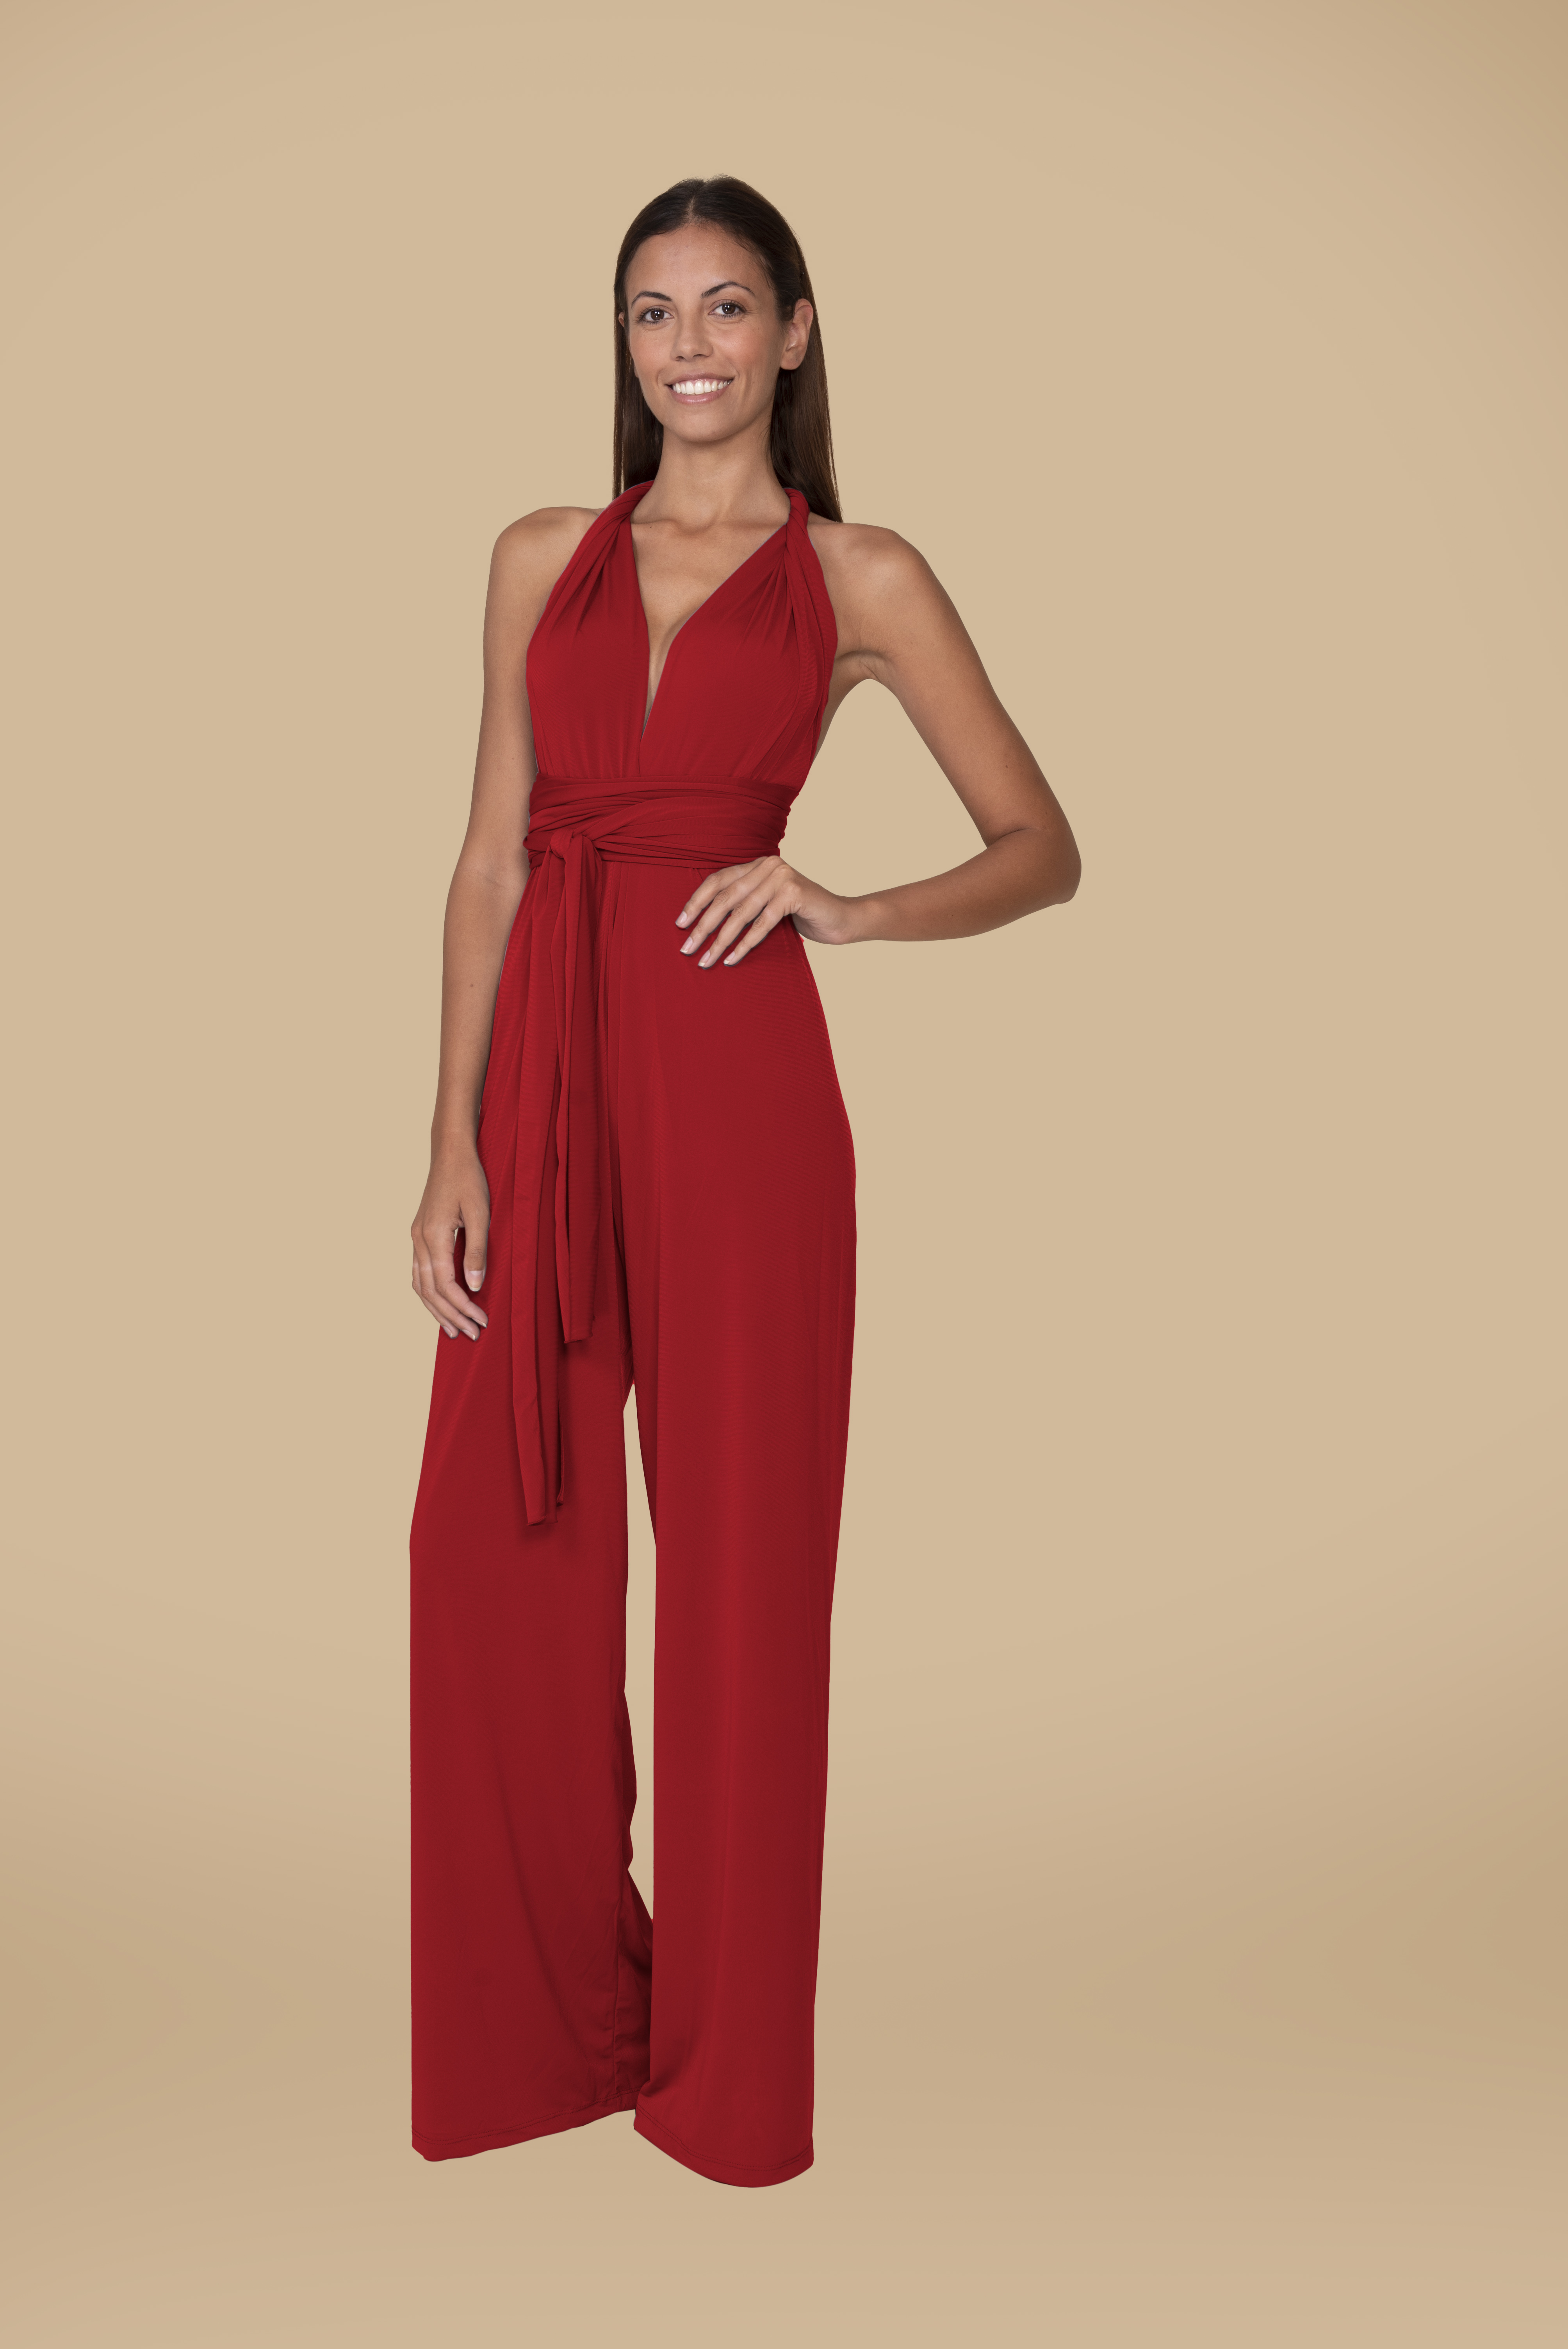 JUMPSUIT IN RED by Infinit Barcelona